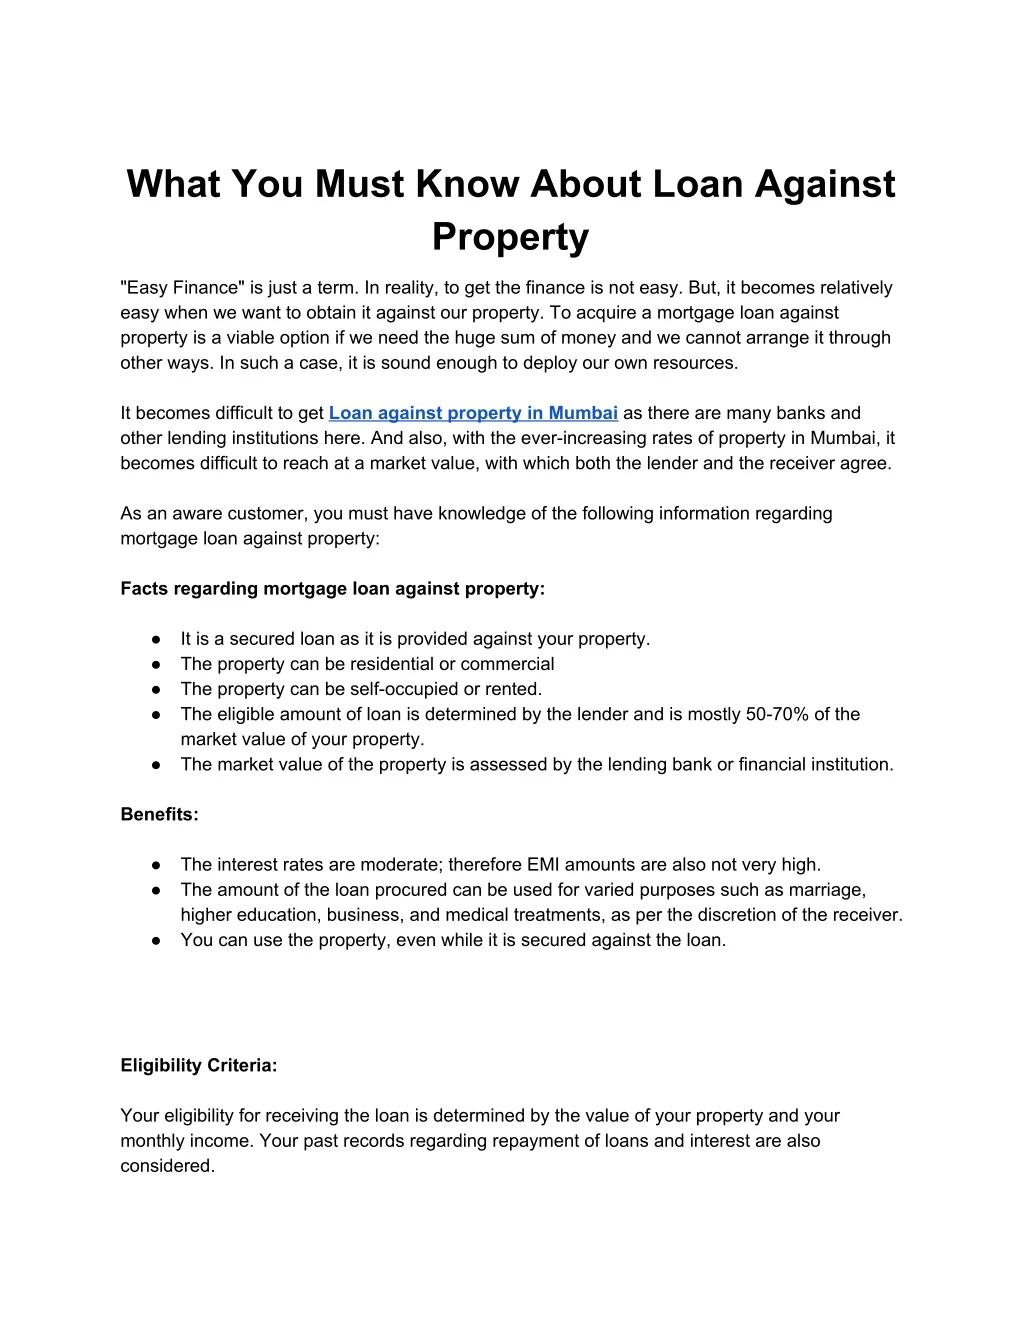 what you must know about loan against property